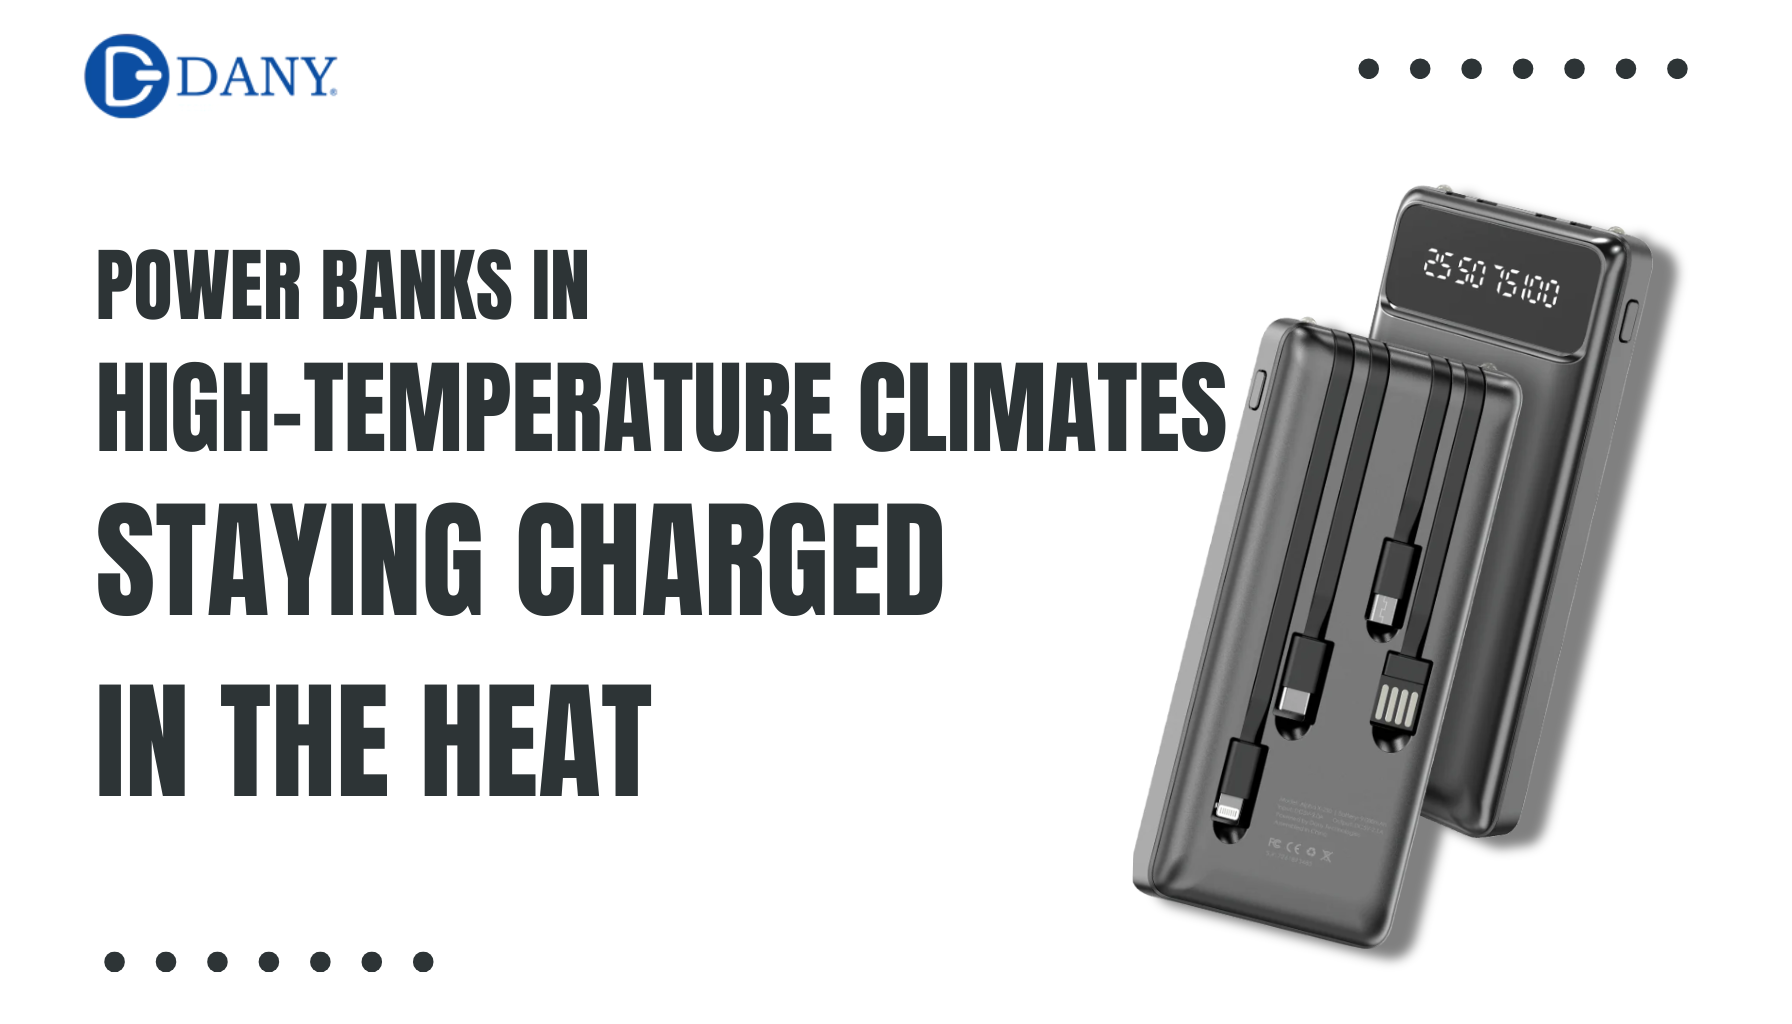 Power Banks in High-Temperature Climates: Staying Charged in the Heat